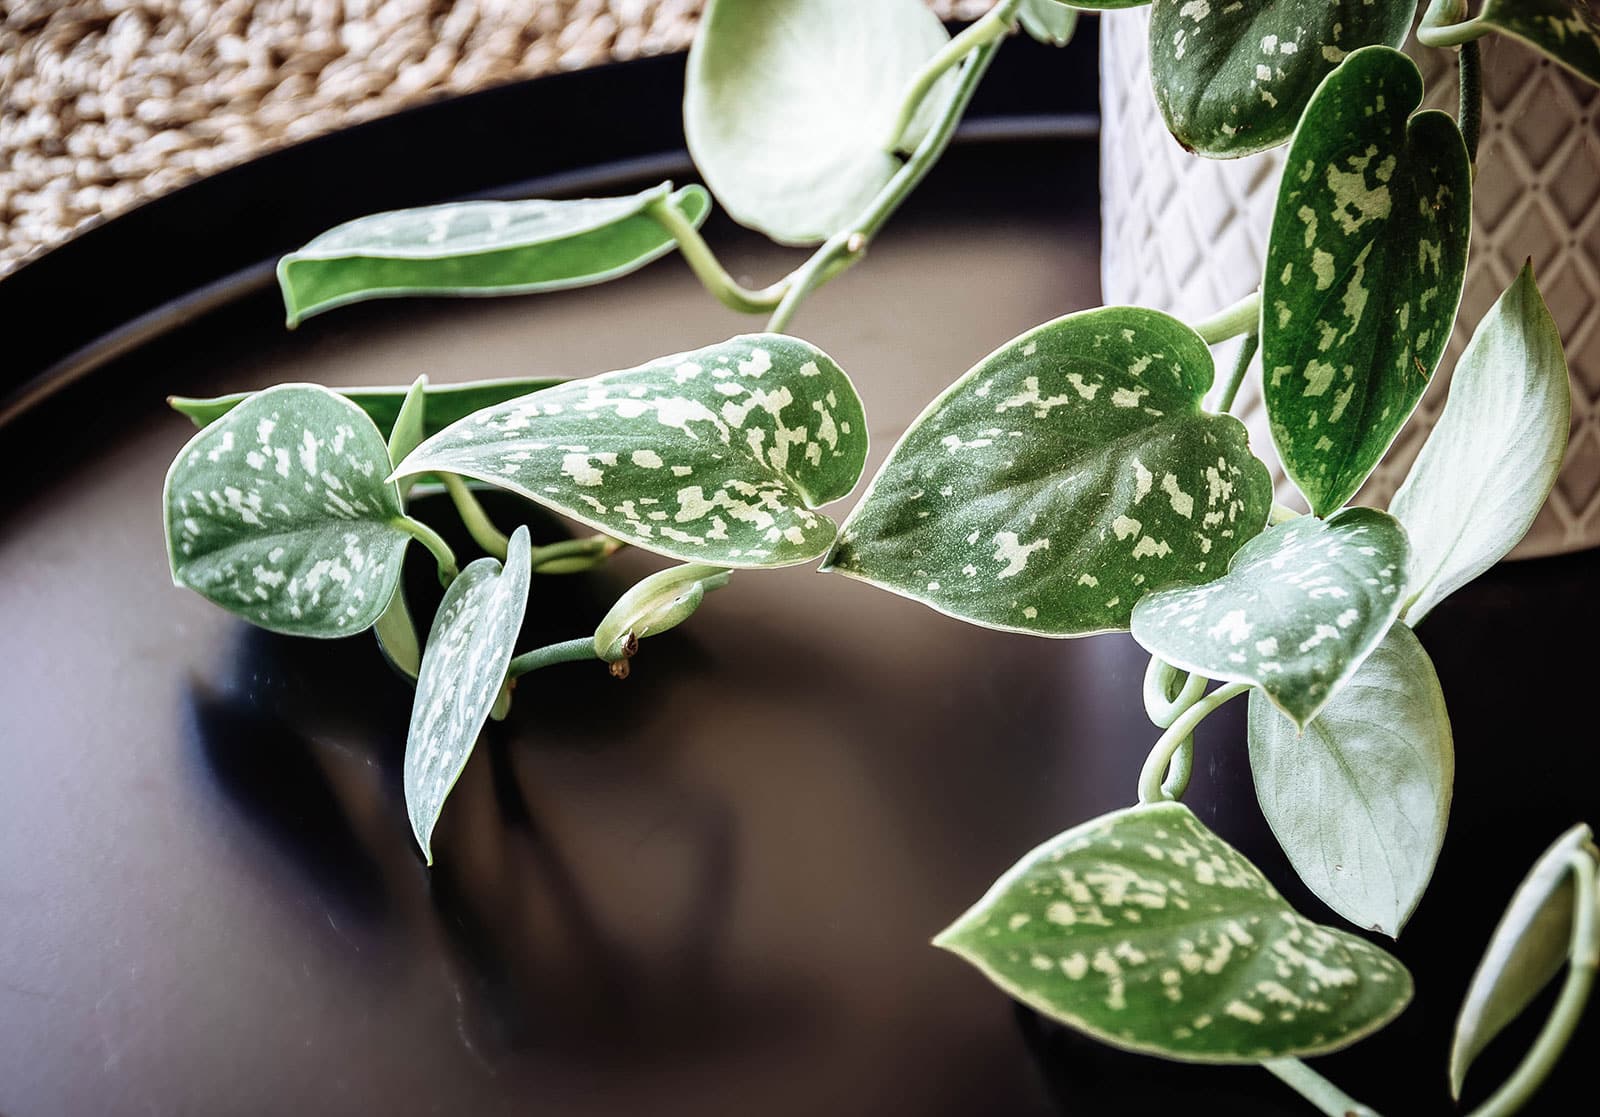 Close-up of Scindapsus pictus (satin Pothos) vines spilling onto a black tray